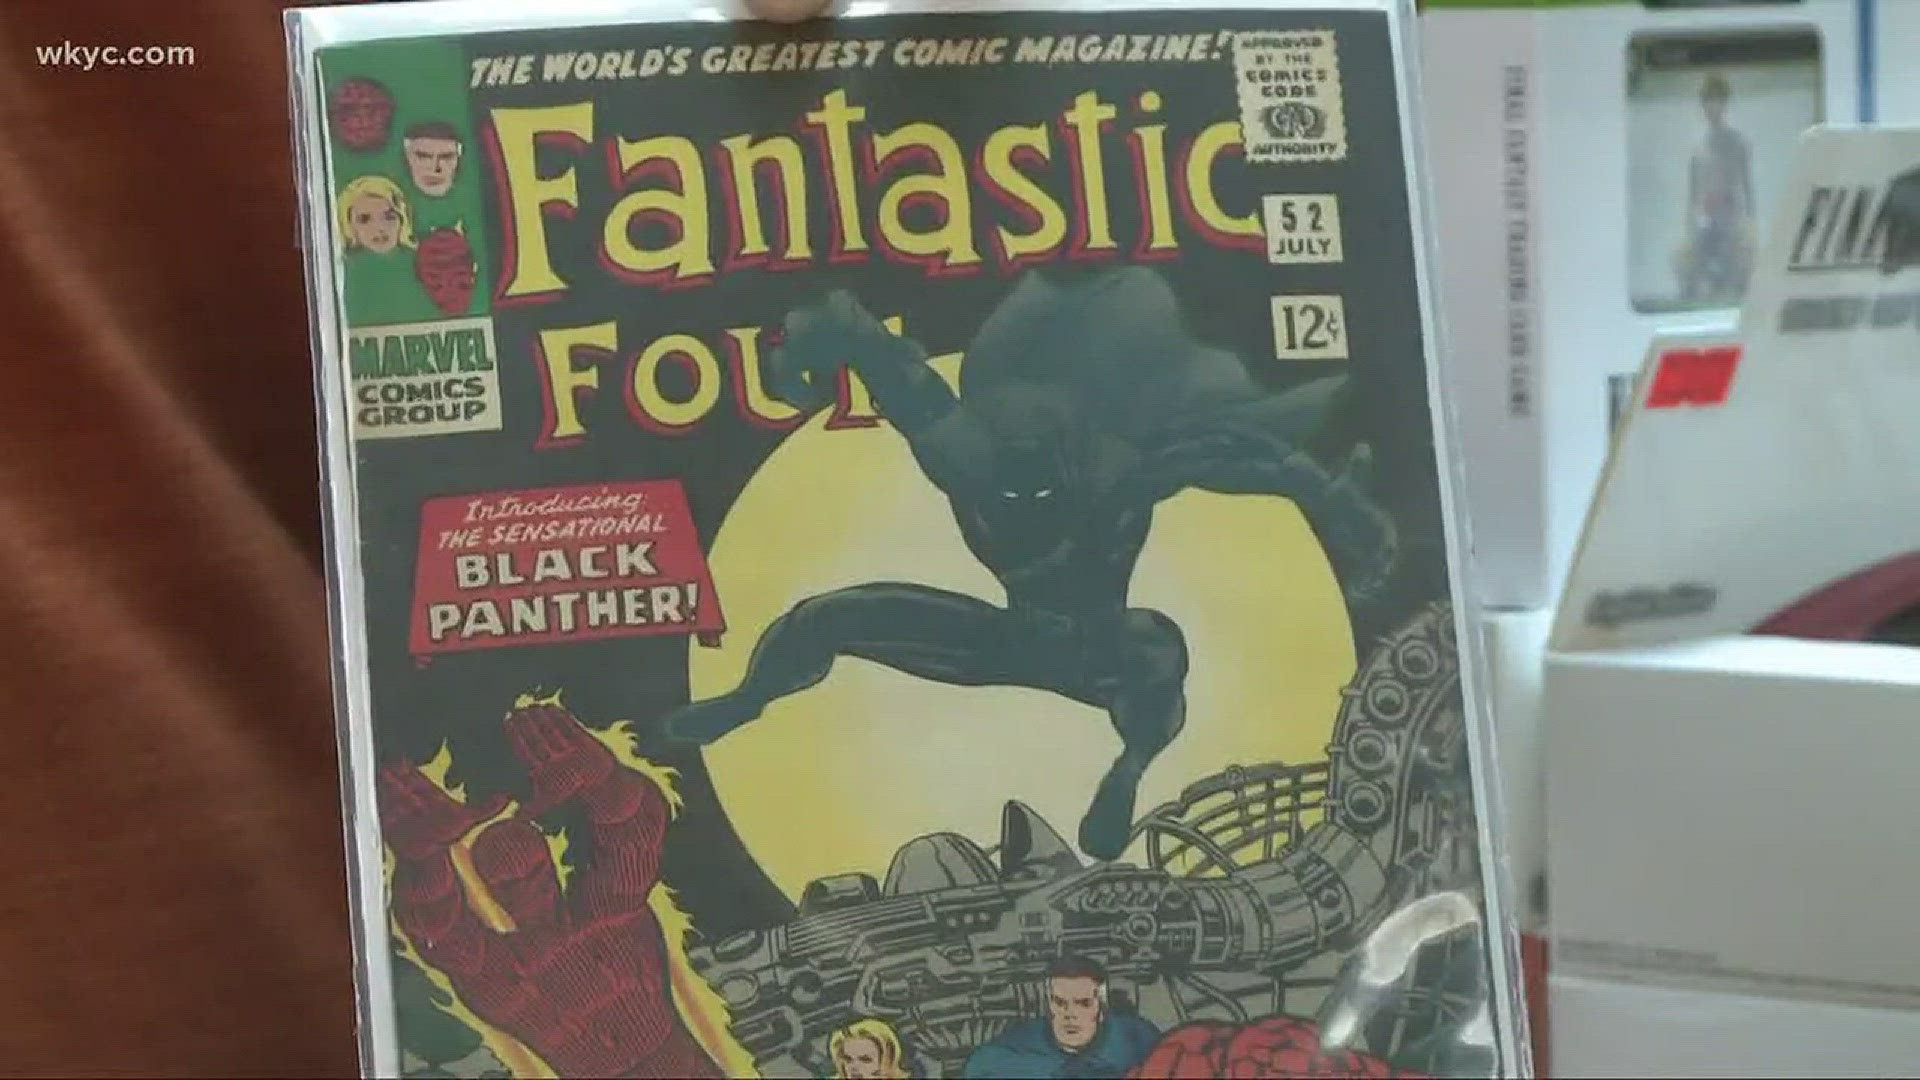 Local comic book collection features first appearance of Black Panther